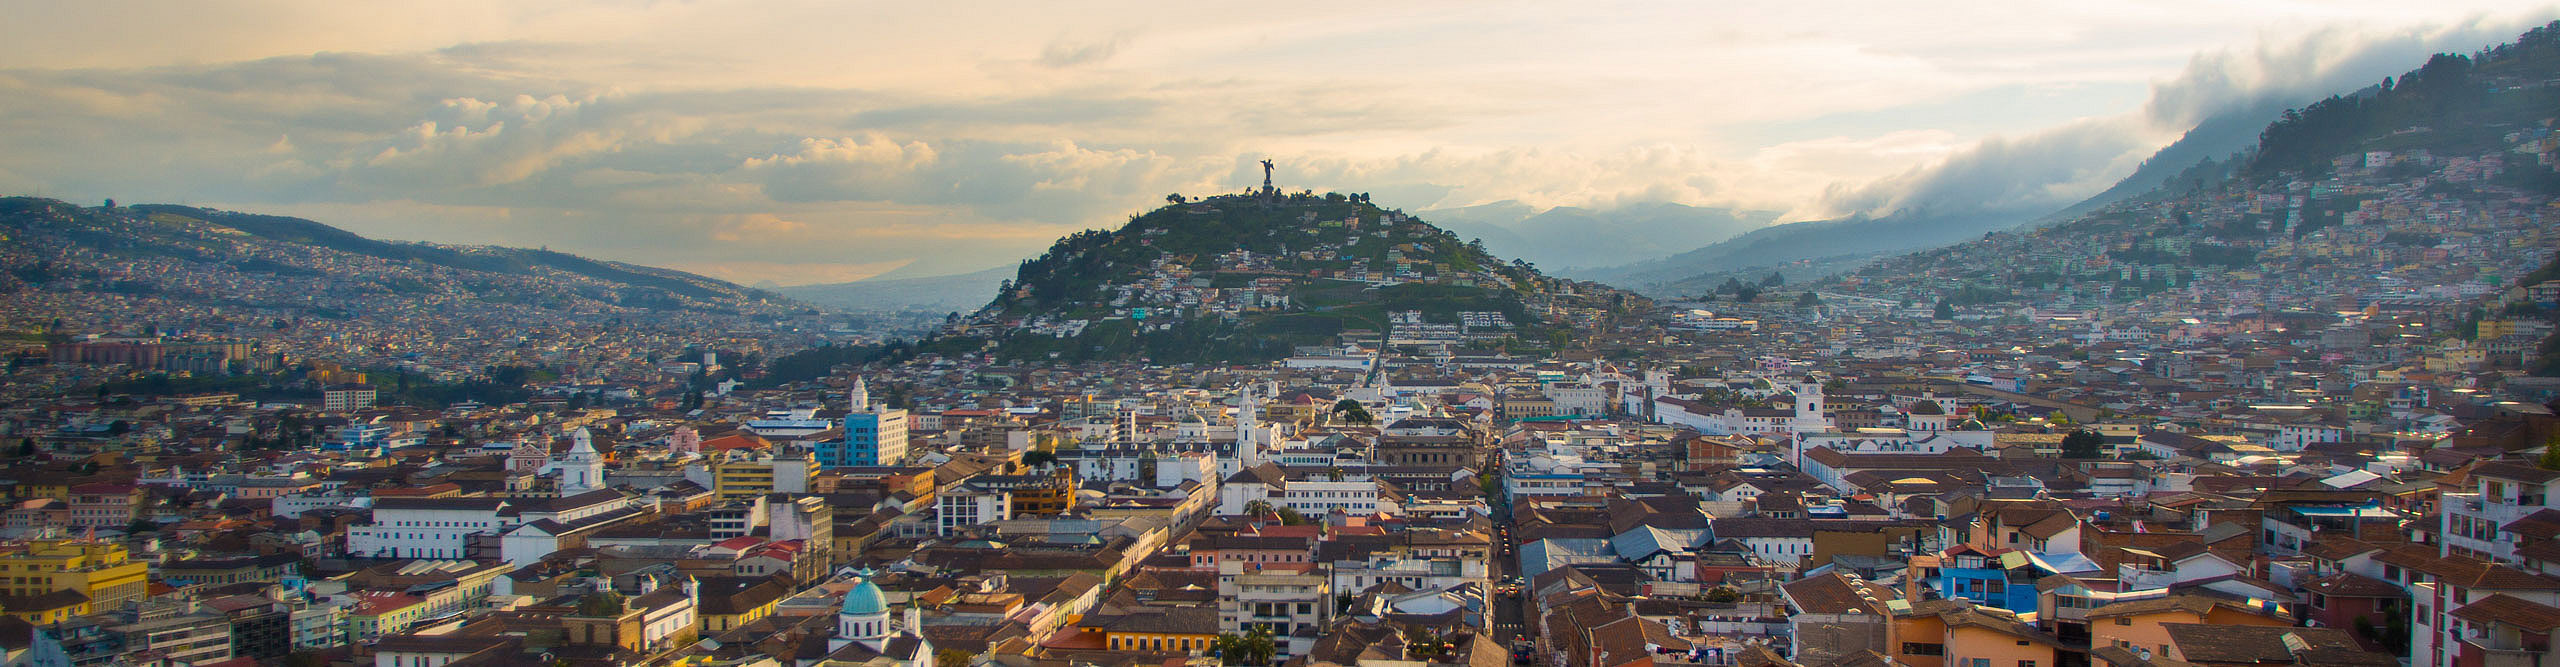 The skyline of historic city of Quito, at sunset, Ecuador